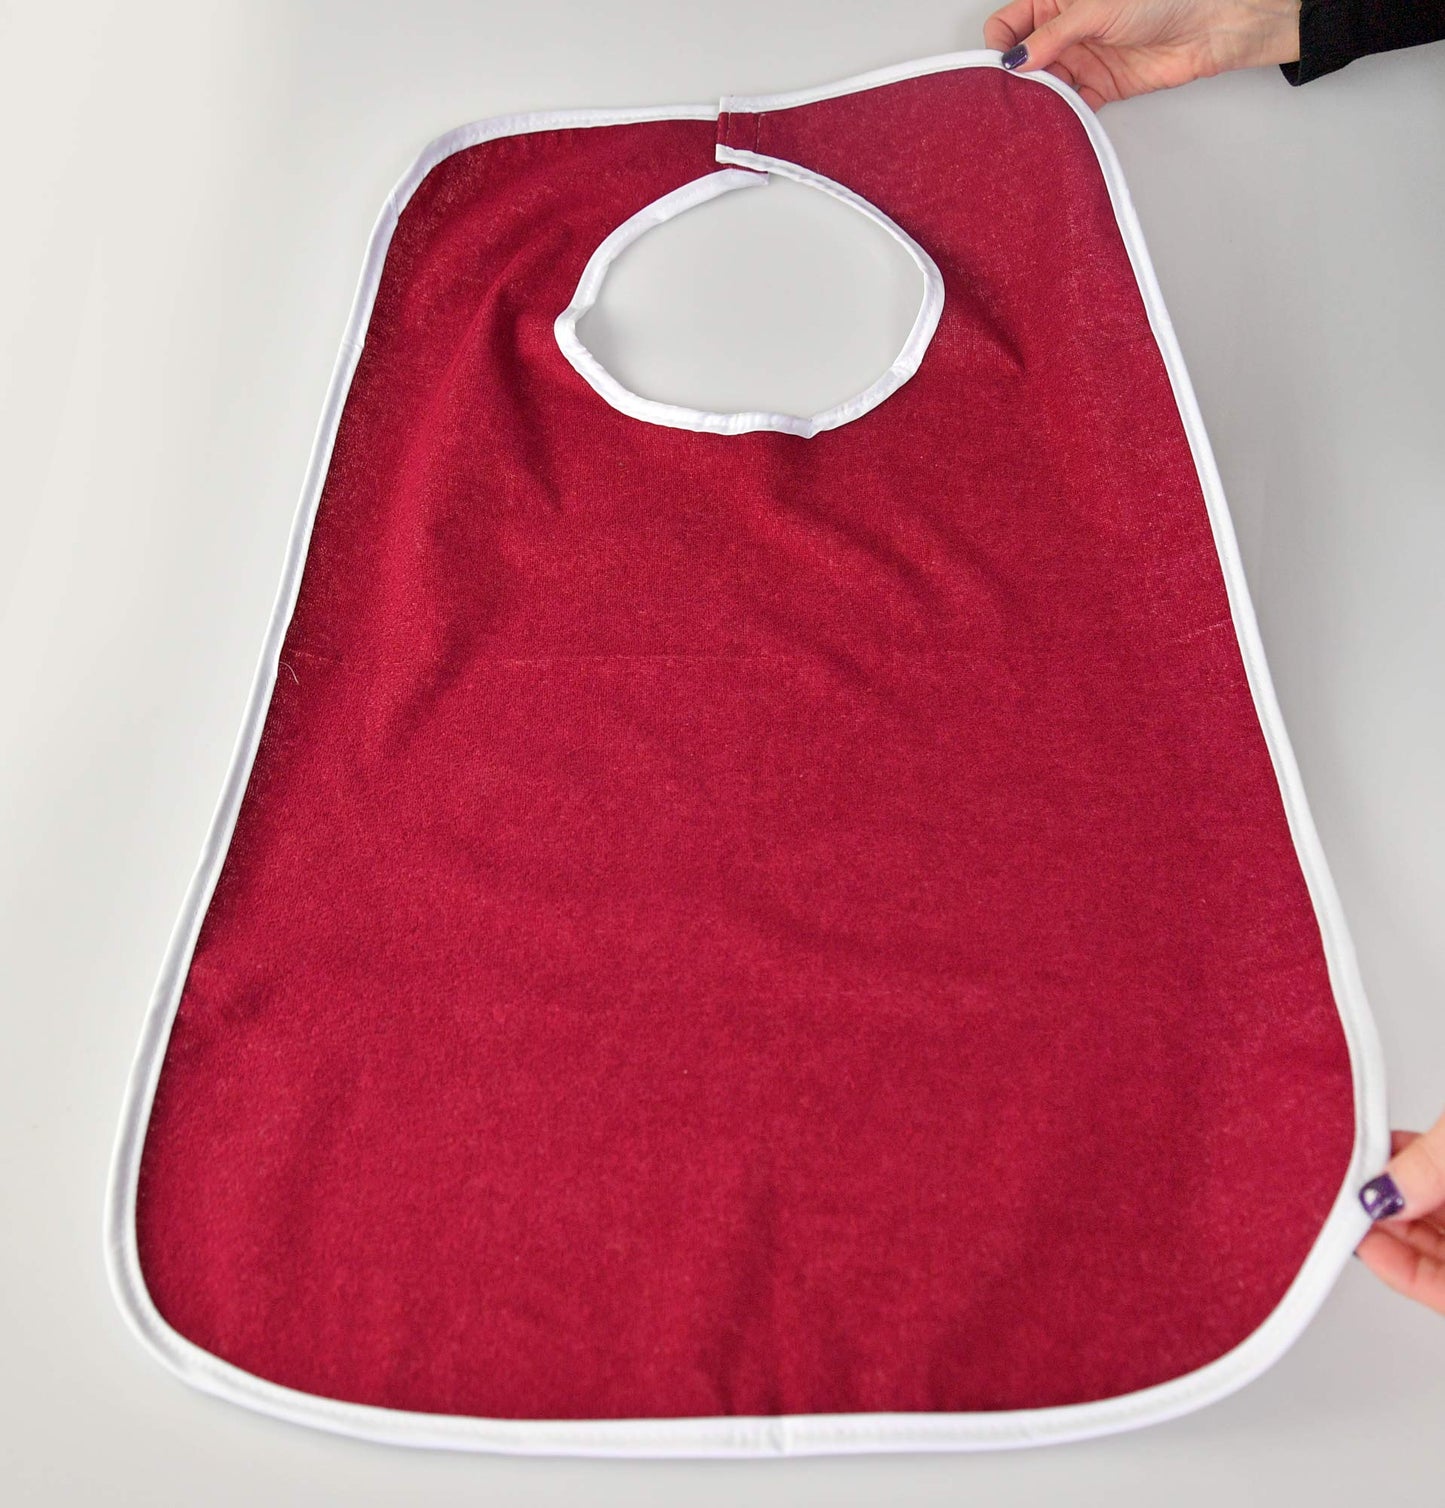 HOME-X Unisex Bib for Men and Women, Waterproof, Terry Cloth, Clothing Protector, Reusable, Vinyl Backing, Machine Washable, Adult Bib-Burgundy-29” L x 17” W